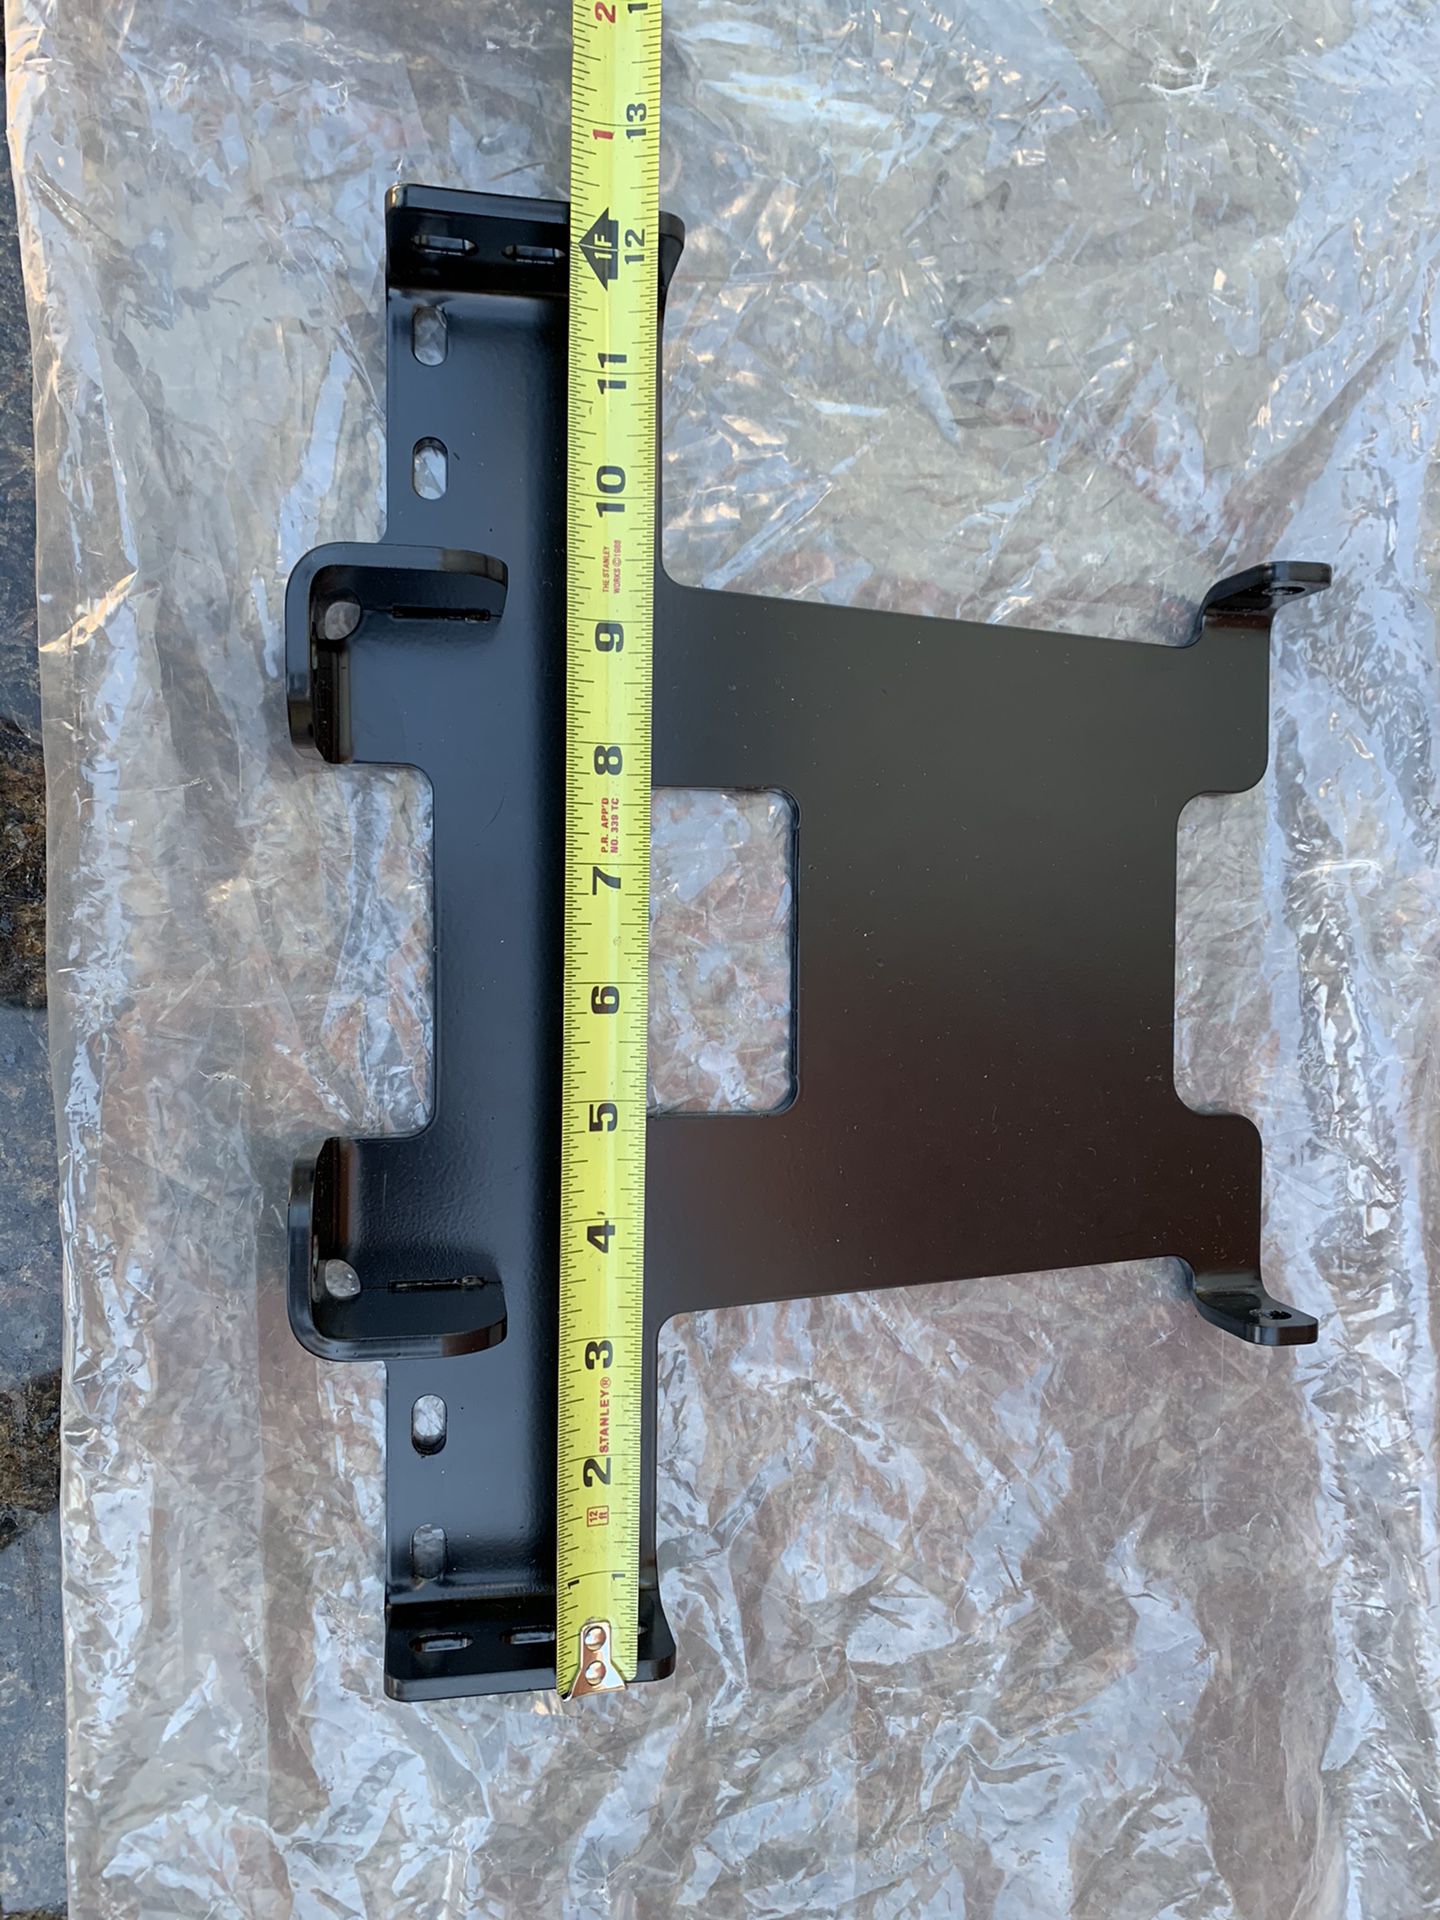 Warn winch contractor and 1500 mounting plate